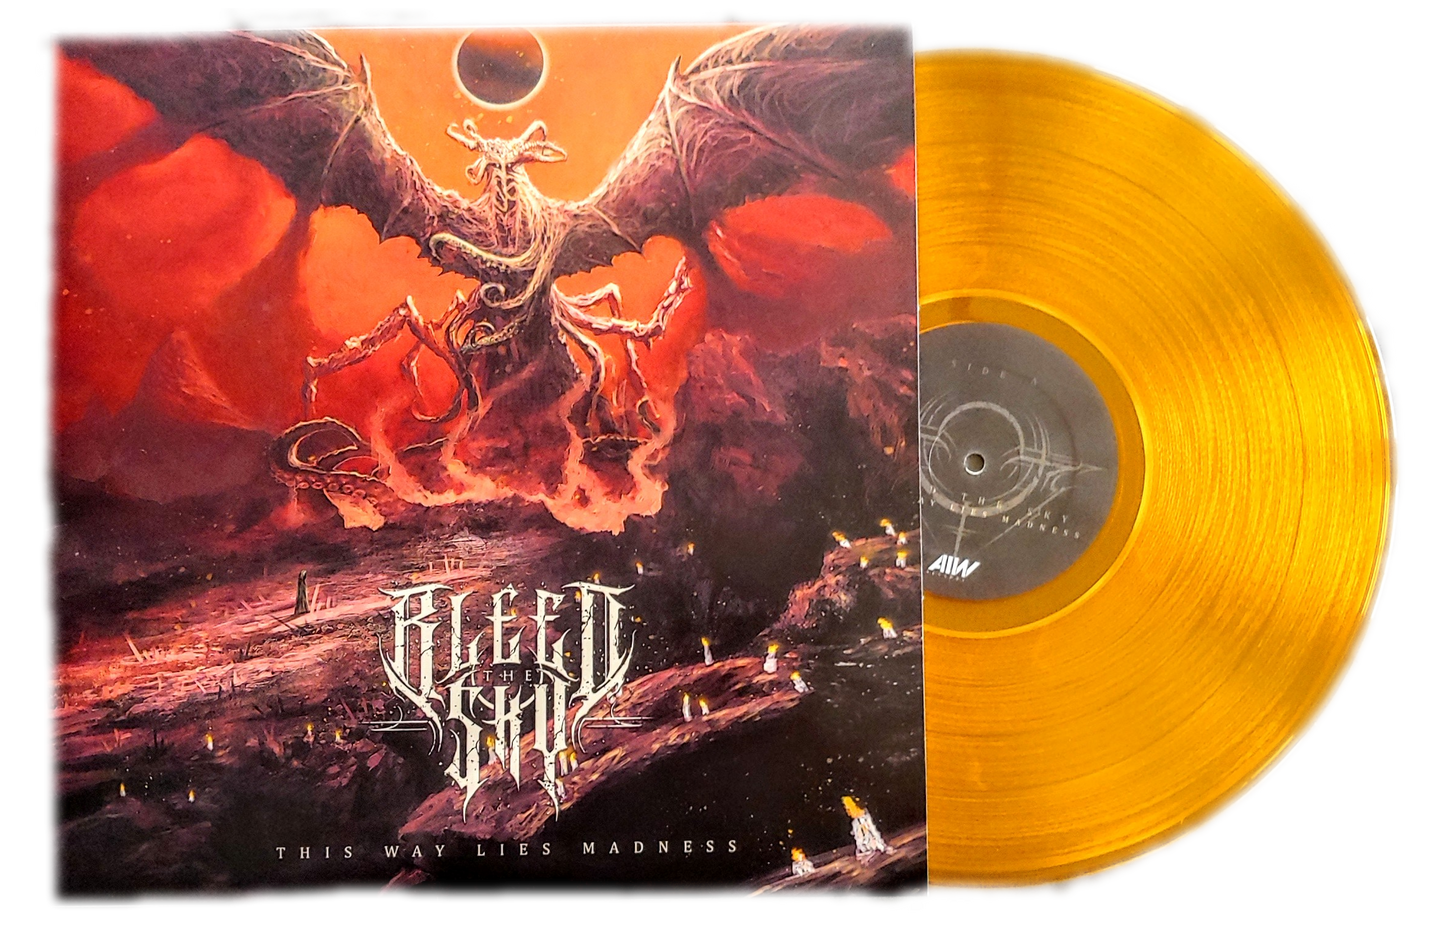 Signed Copy of Bleed The Sky - This Way Lies Madness On Vinyl